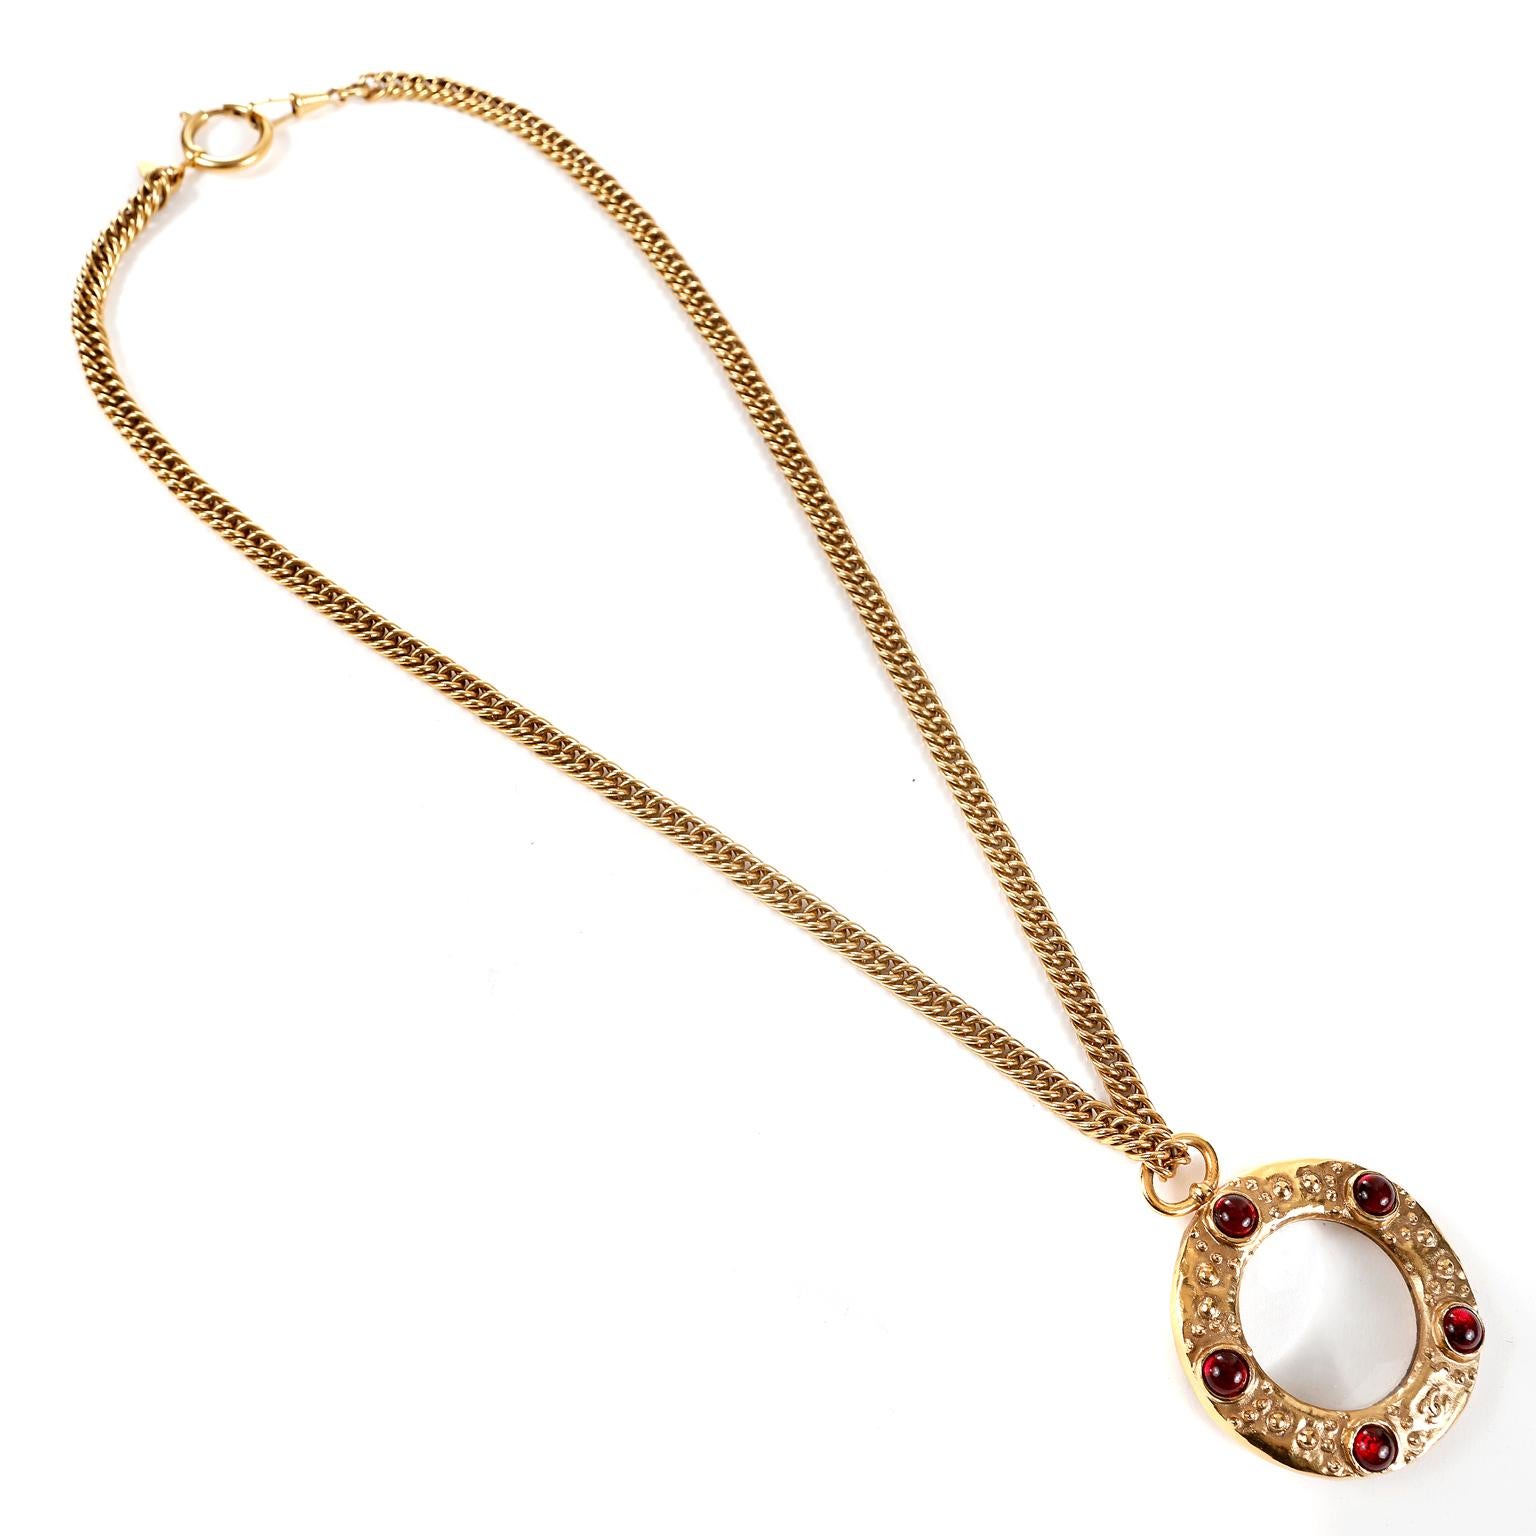 This authentic Chanel Red Gripoix Magnifier Necklace is in excellent condition from the late 1980’s.  24 karat gold plated chain with round magnifier pendant.  Gold tone embellished metal with dark red Gripoix glass stones.   Approximately 27.5